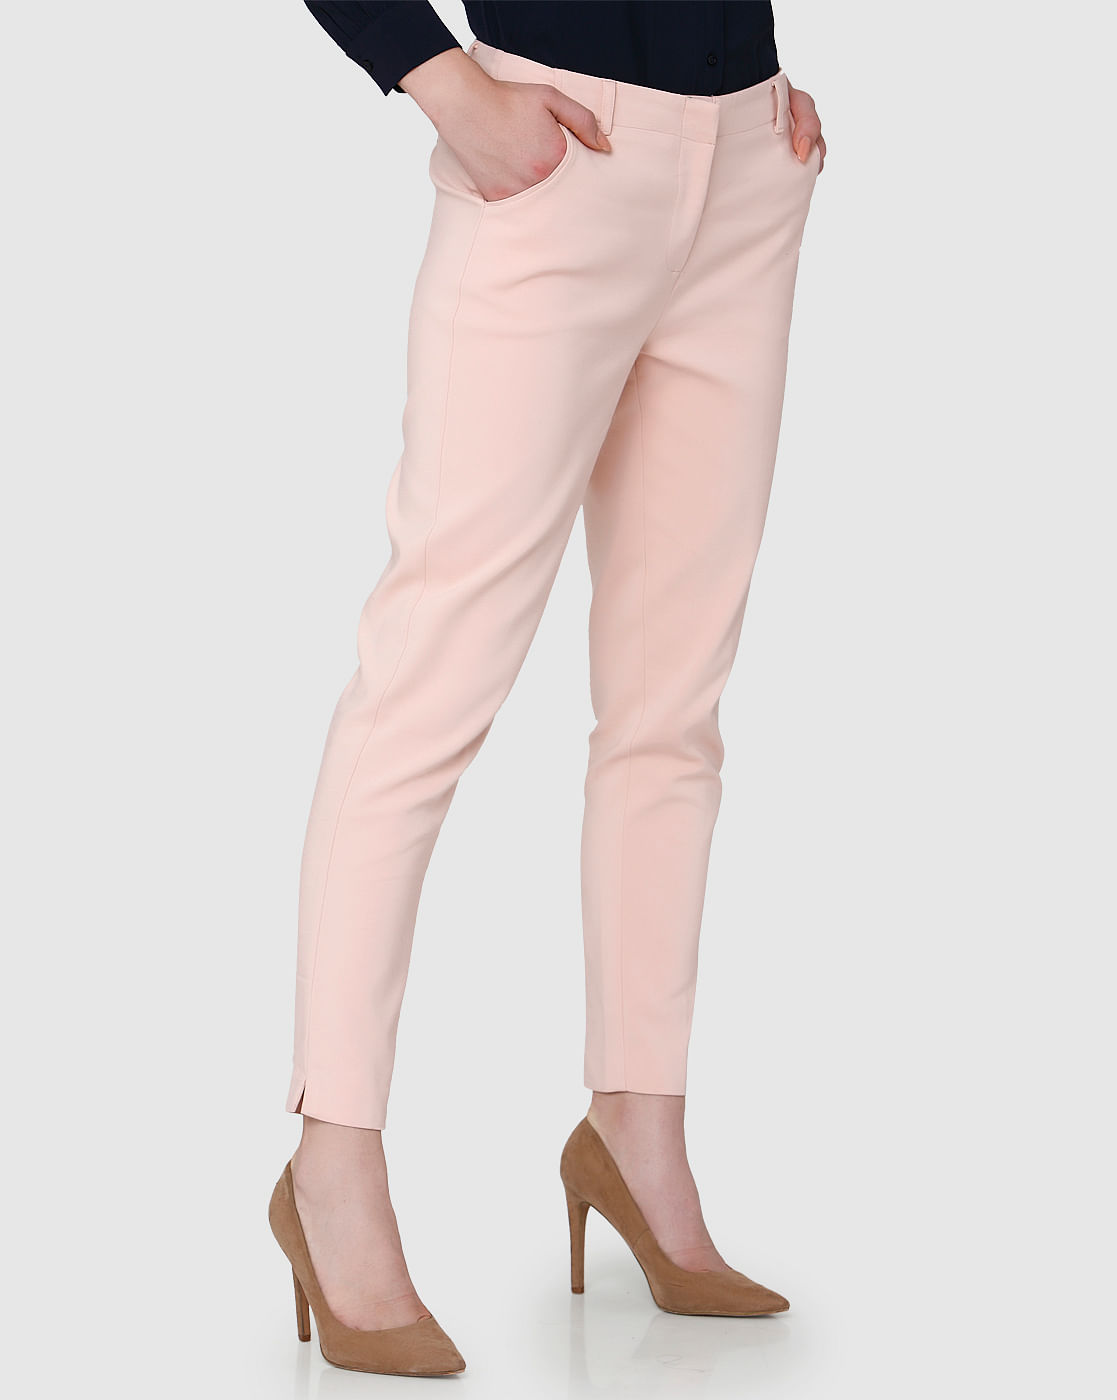 Buy AND Solid Rayon Straight Fit Women's Formal Pants | Shoppers Stop